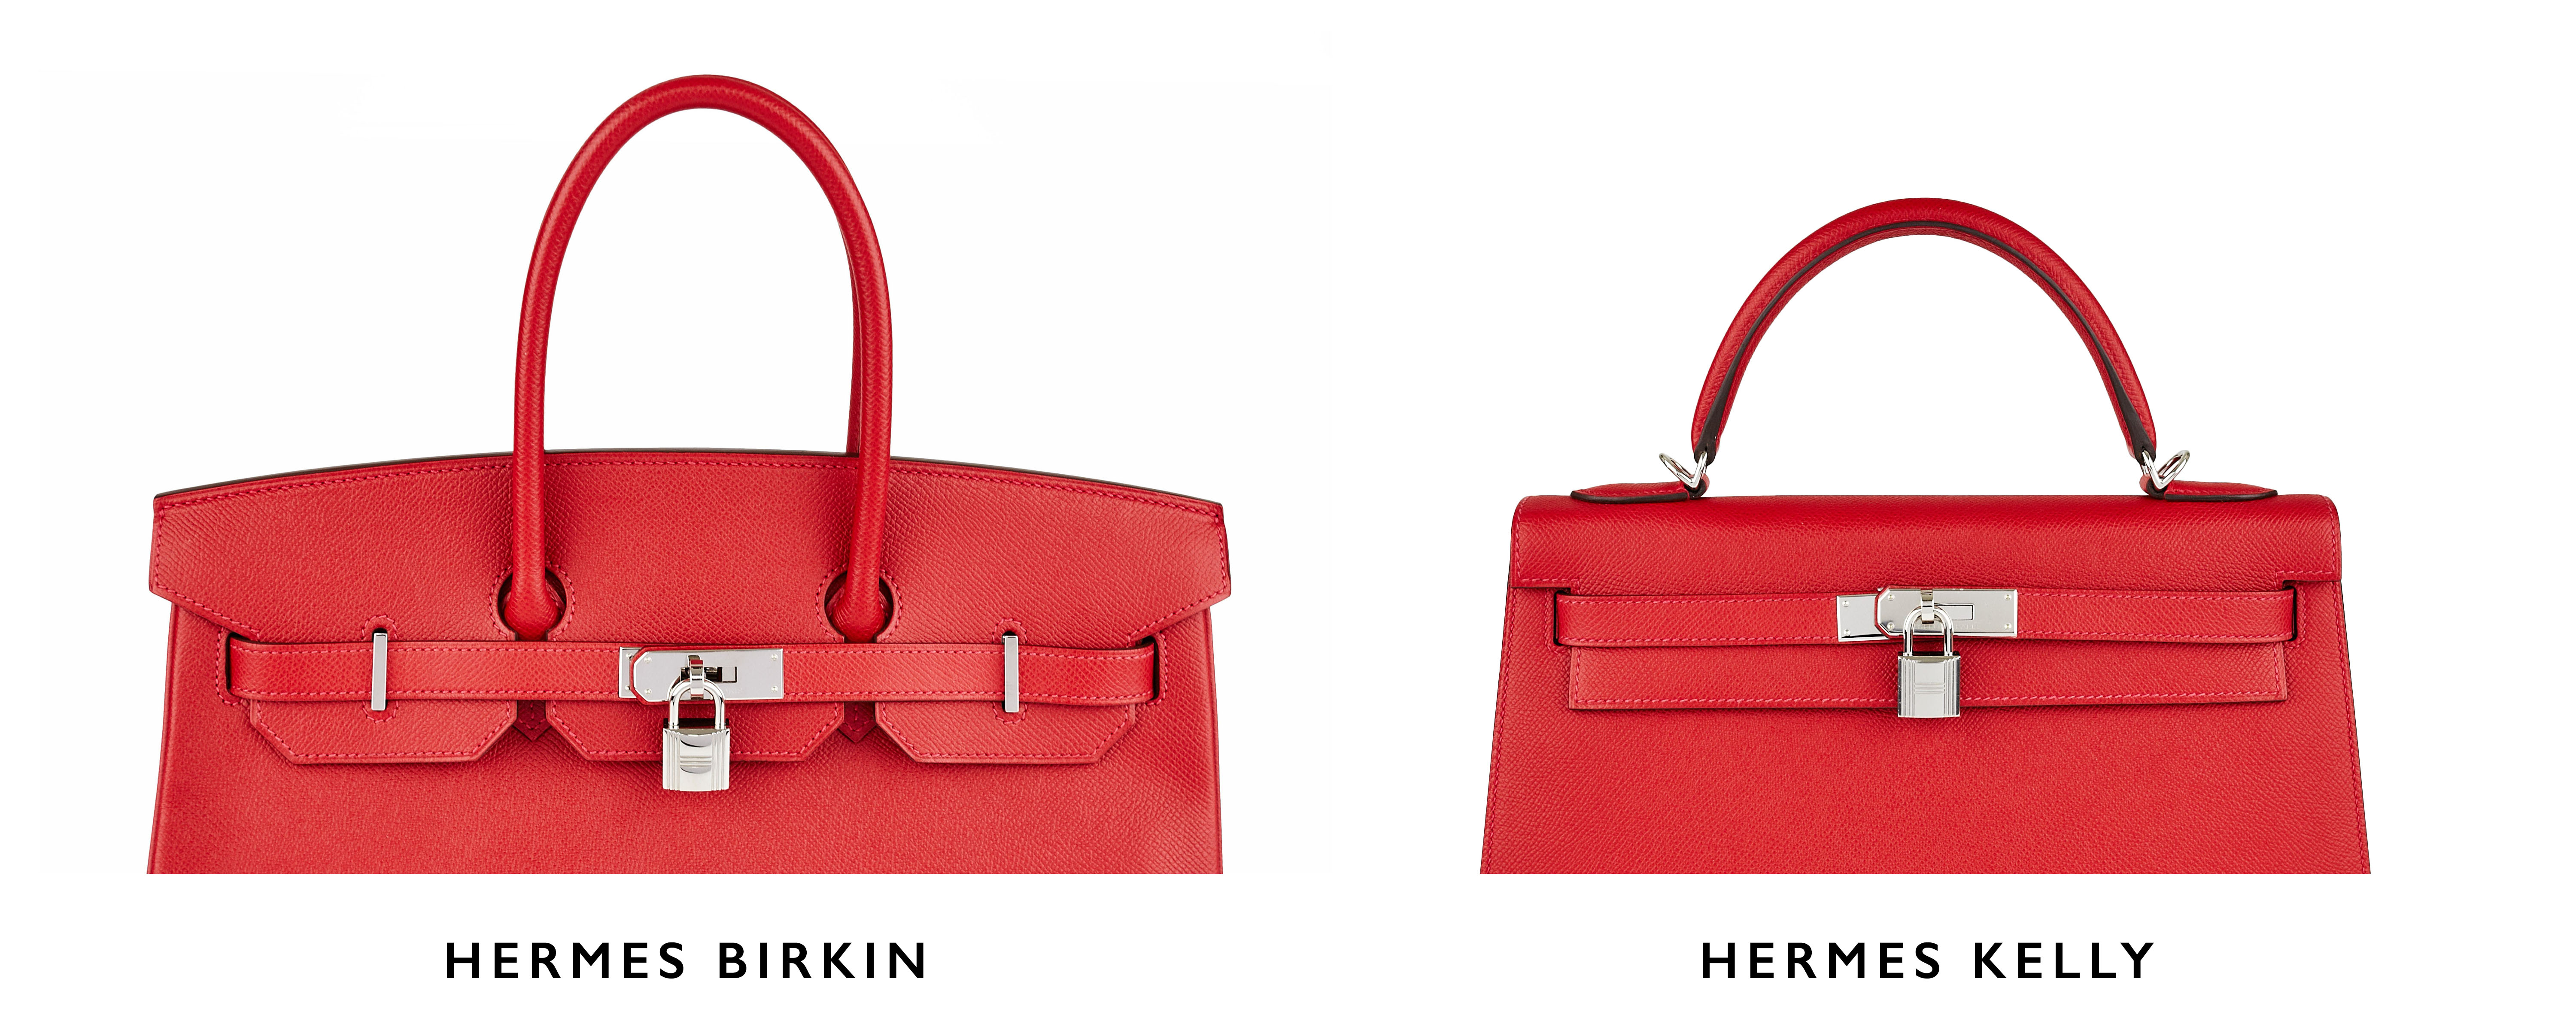 Hermes Birkin vs. Kelly Bag | Authenticated Pre-Owned Luxury at YoogisCloset.com 